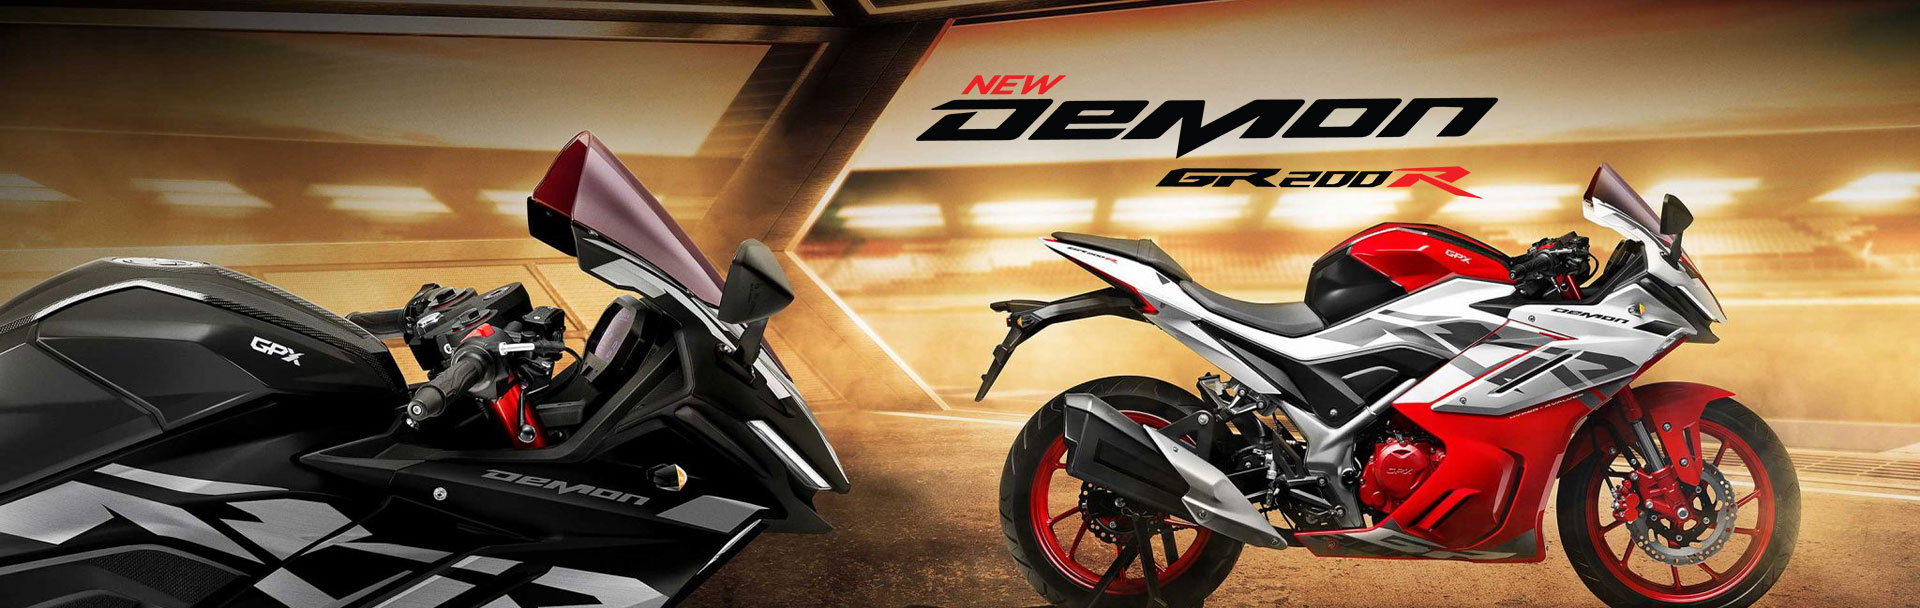 GPX Demon GR200RR Special Edition Overview 